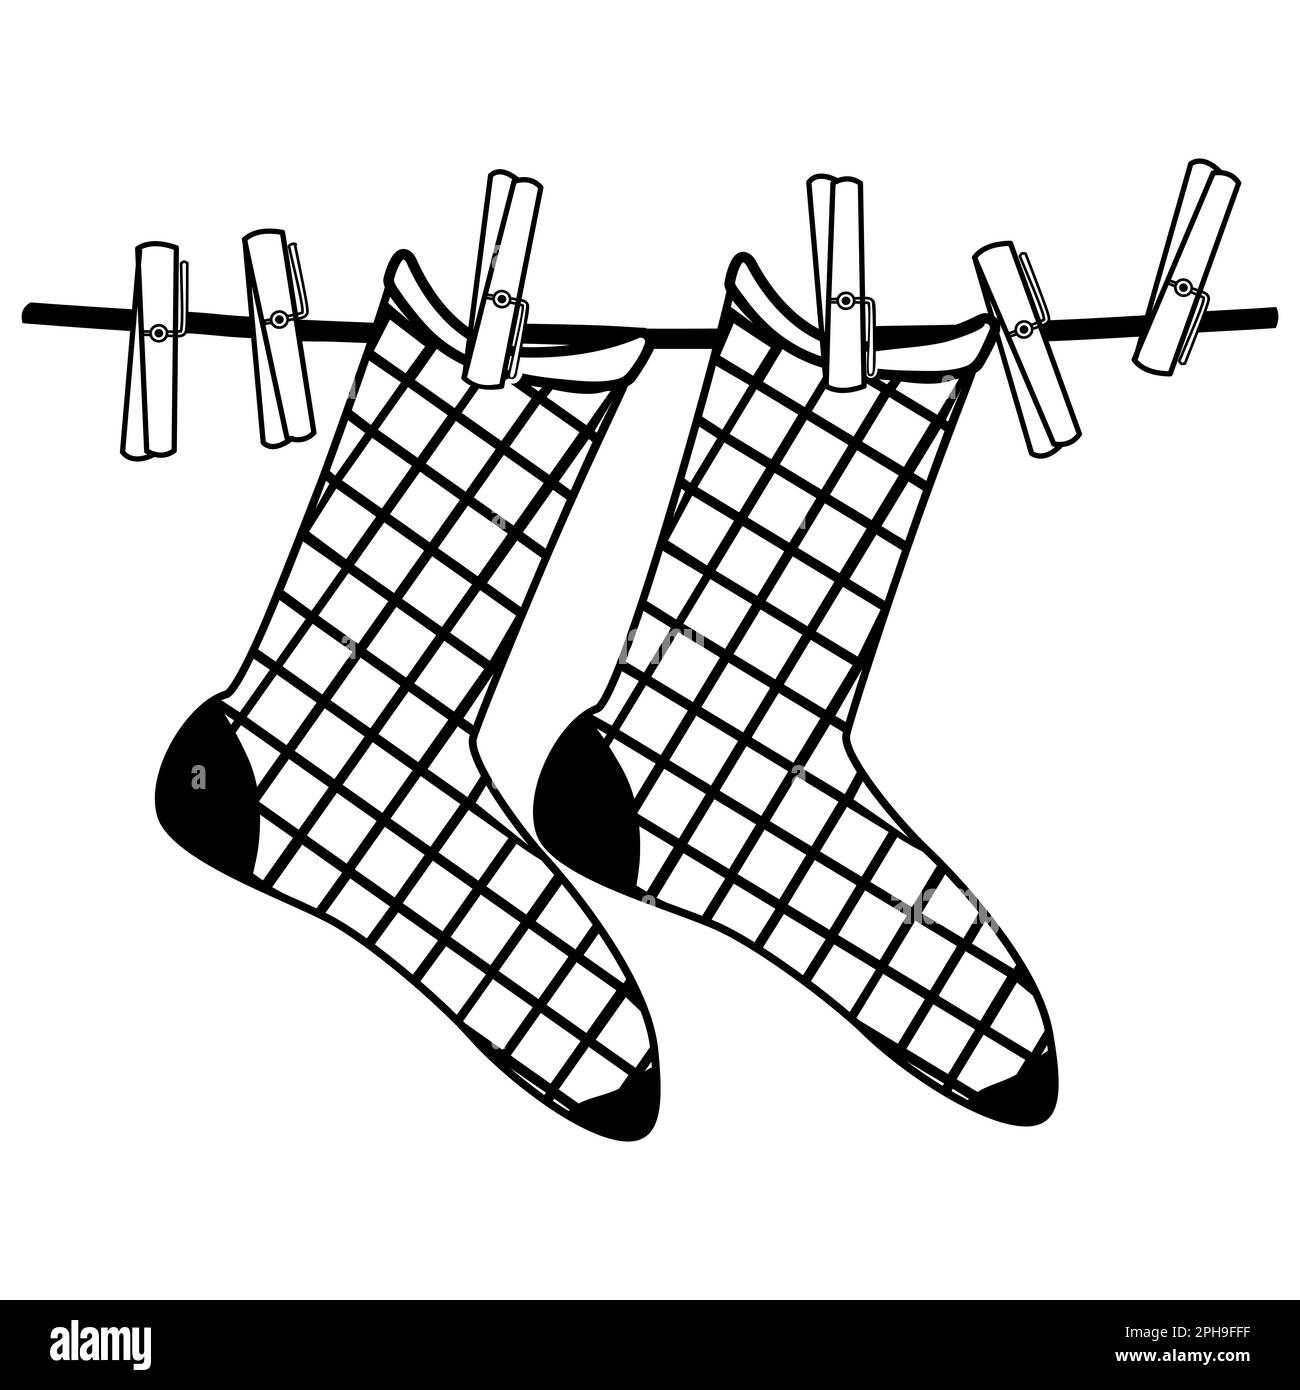 Socks on clothespin icon.Socks hanging on clothesline.Socks hang on rope.Simple line laundry drying sign, contour symbol.Washed garment concept.Vector Stock Vector